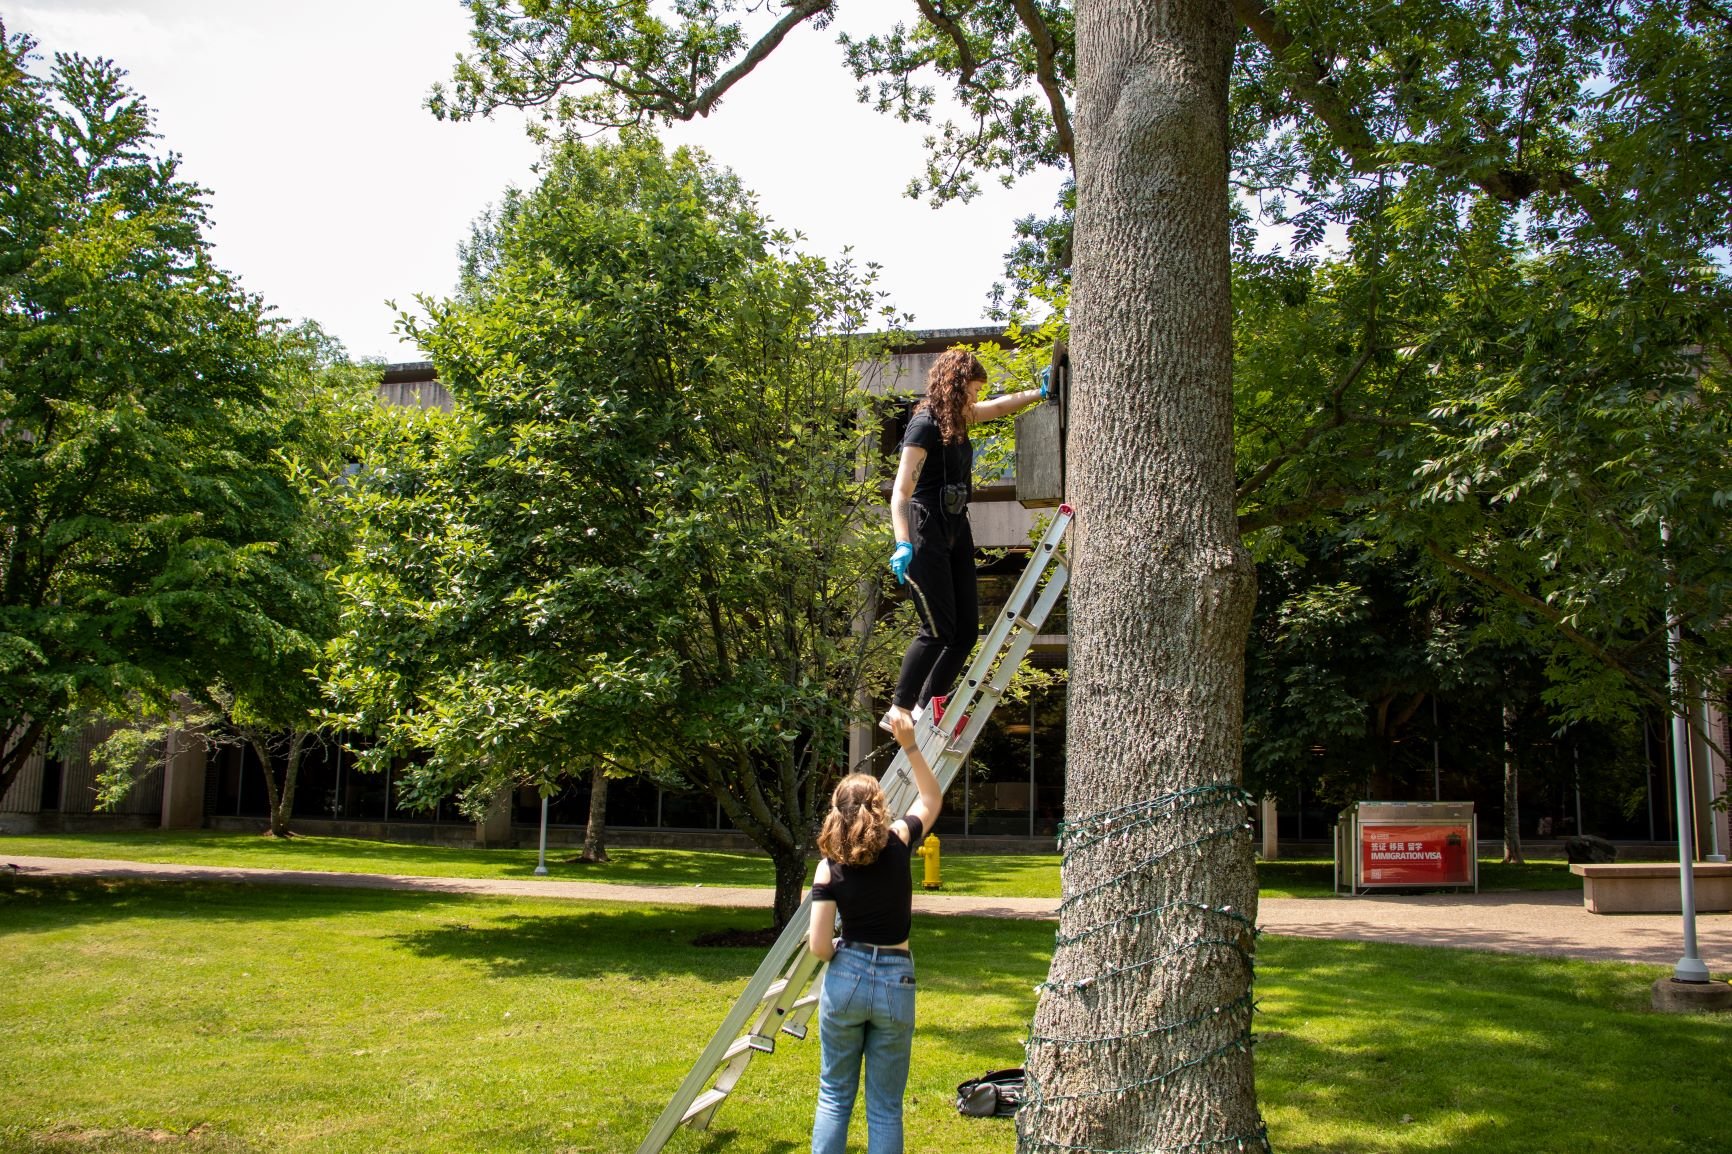  Alyssa Wells (shown here steadying the ladder for Armstrong) credits a fourth-year biology course with Dr. Barber as the reason she fell in love with the field of behavioural ecology. She was fascinated with how researchers create observational stud